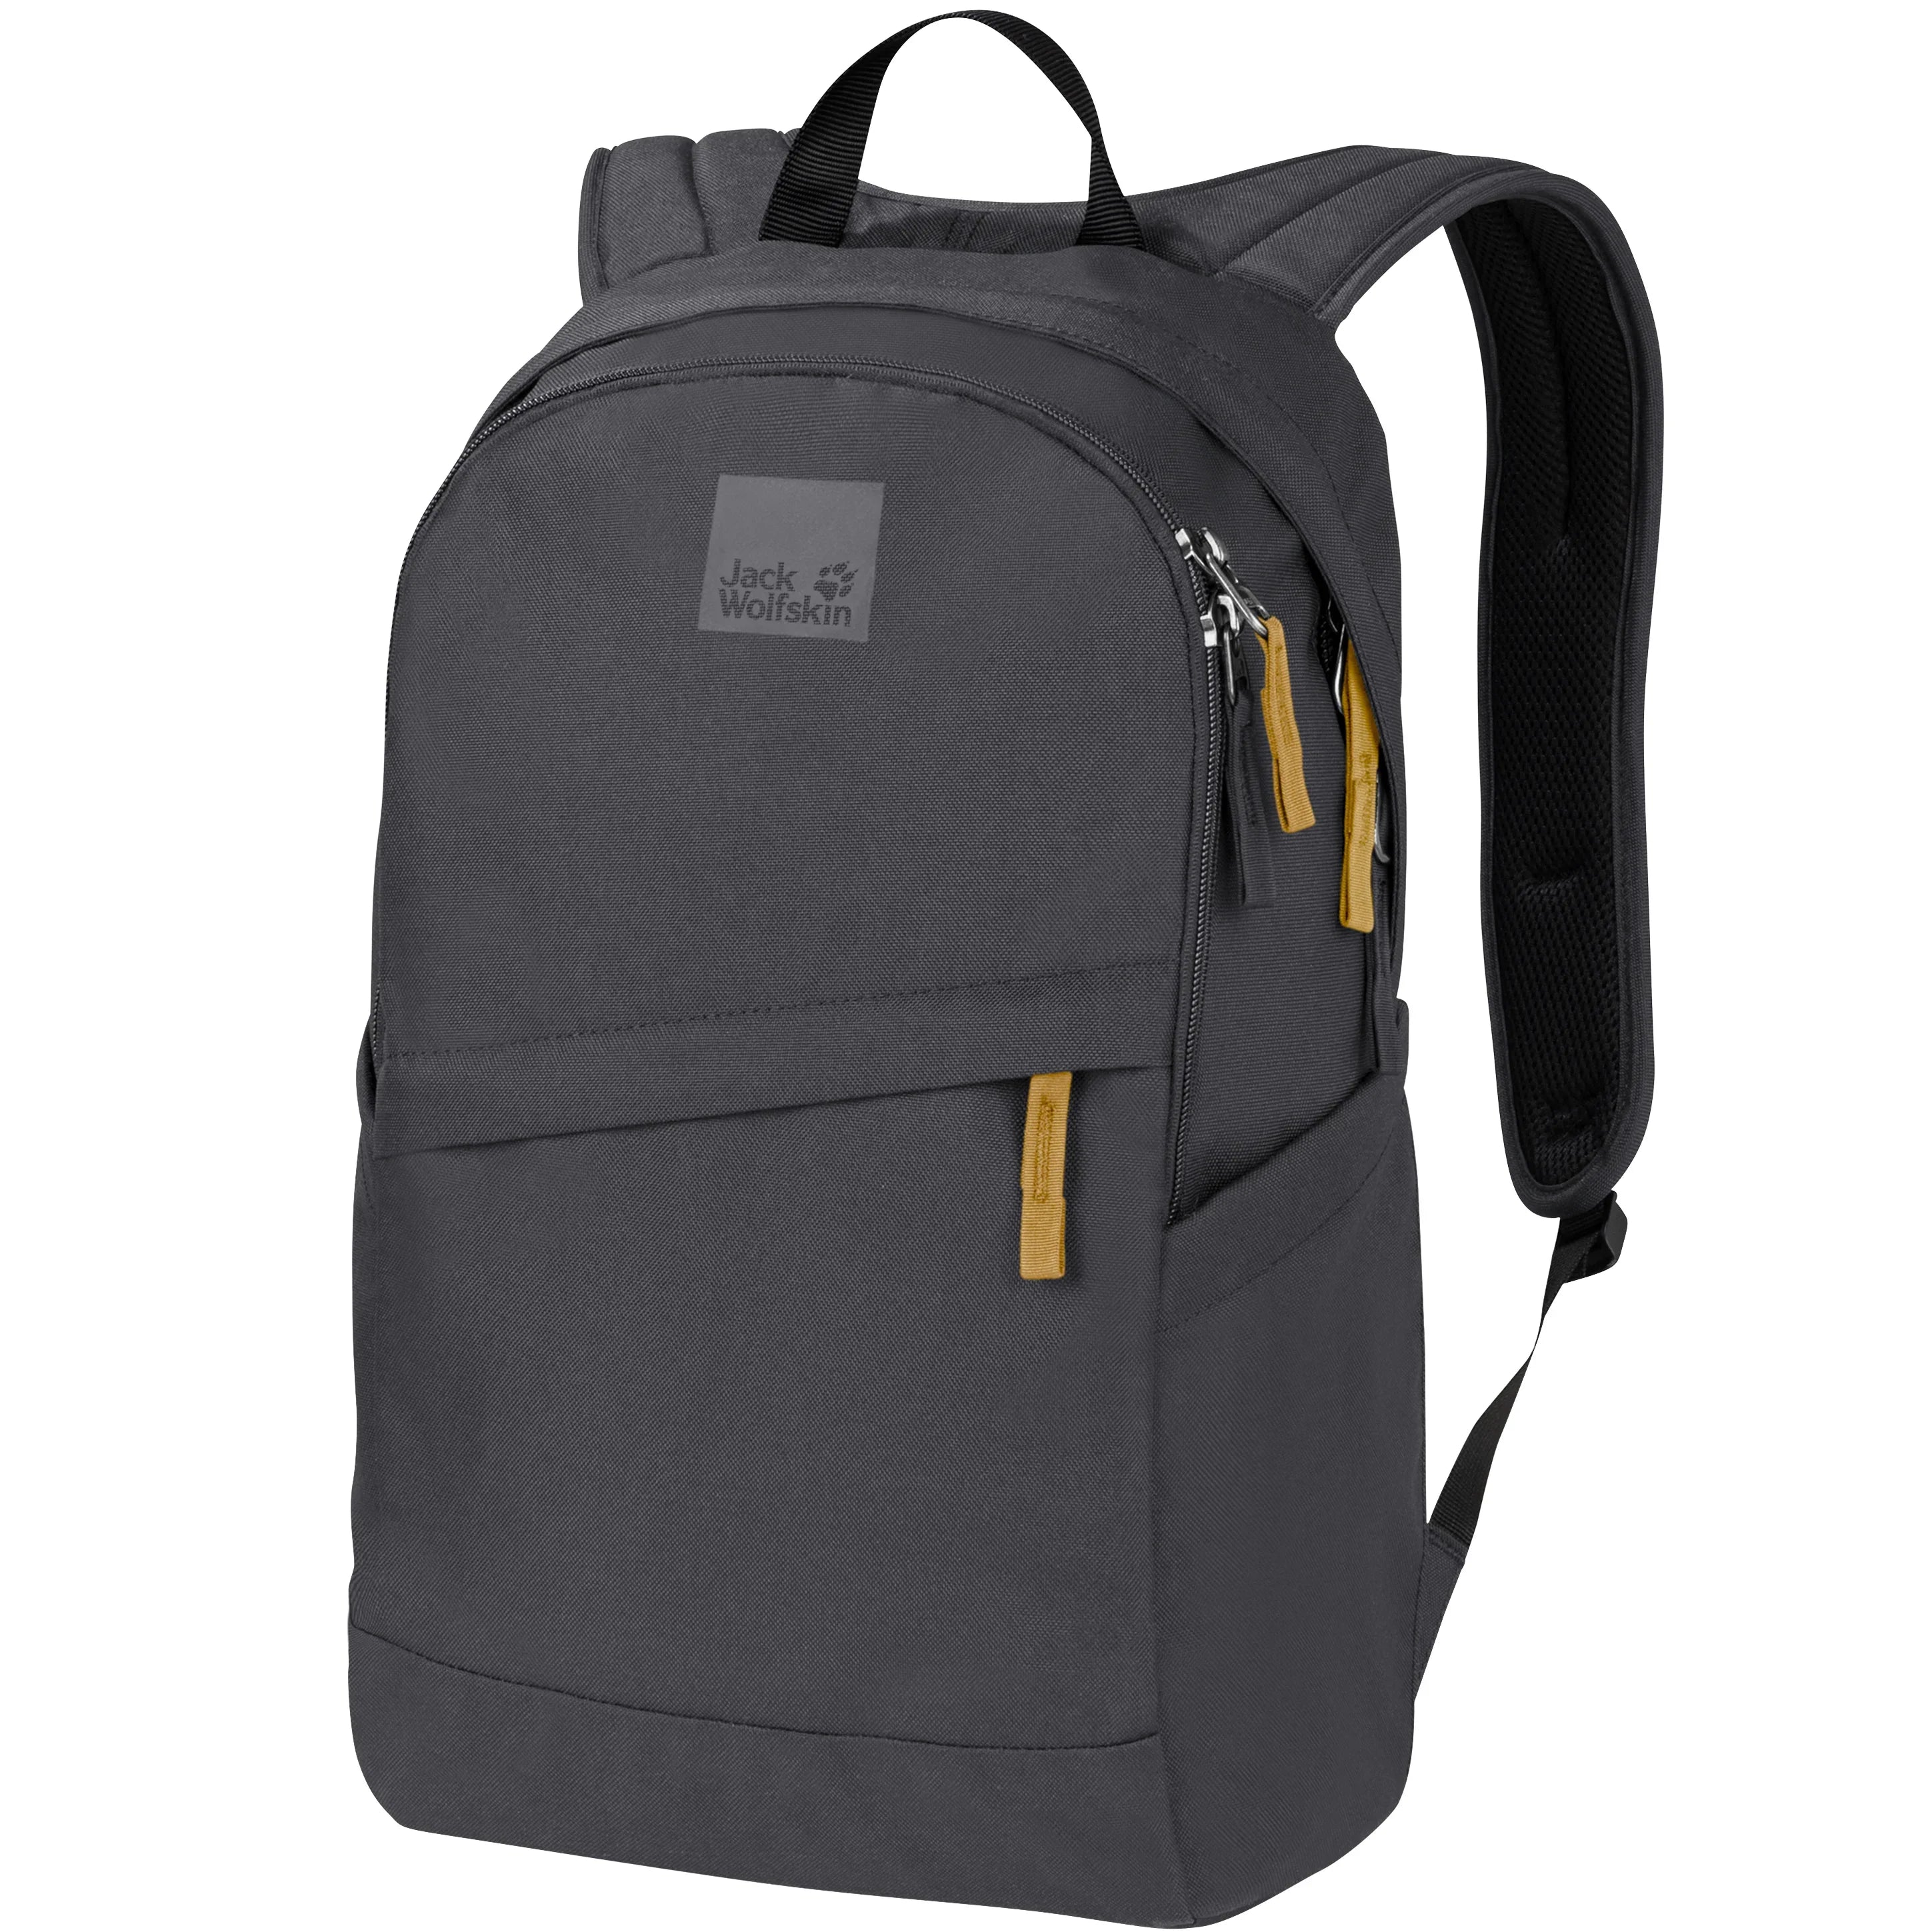 Jack Wolfskin daypacks - travel companions perfect bags for life and everyday &